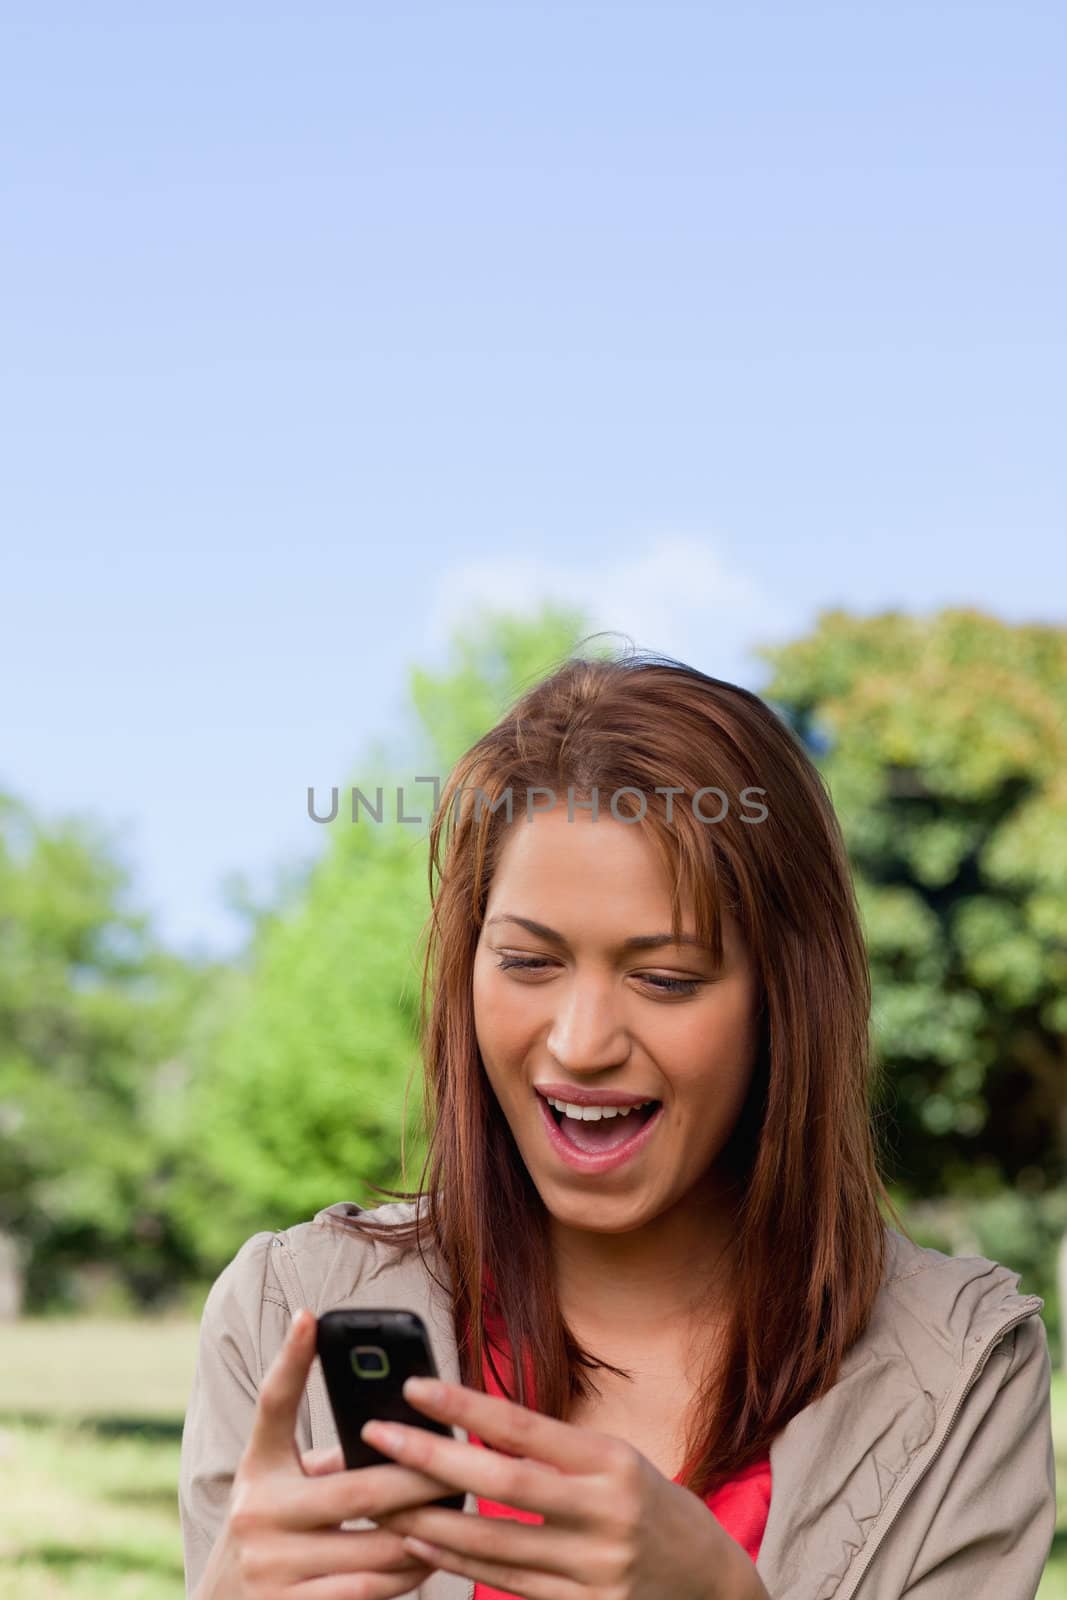 Woman joyfully reading a text message in a bright area surrounded by trees